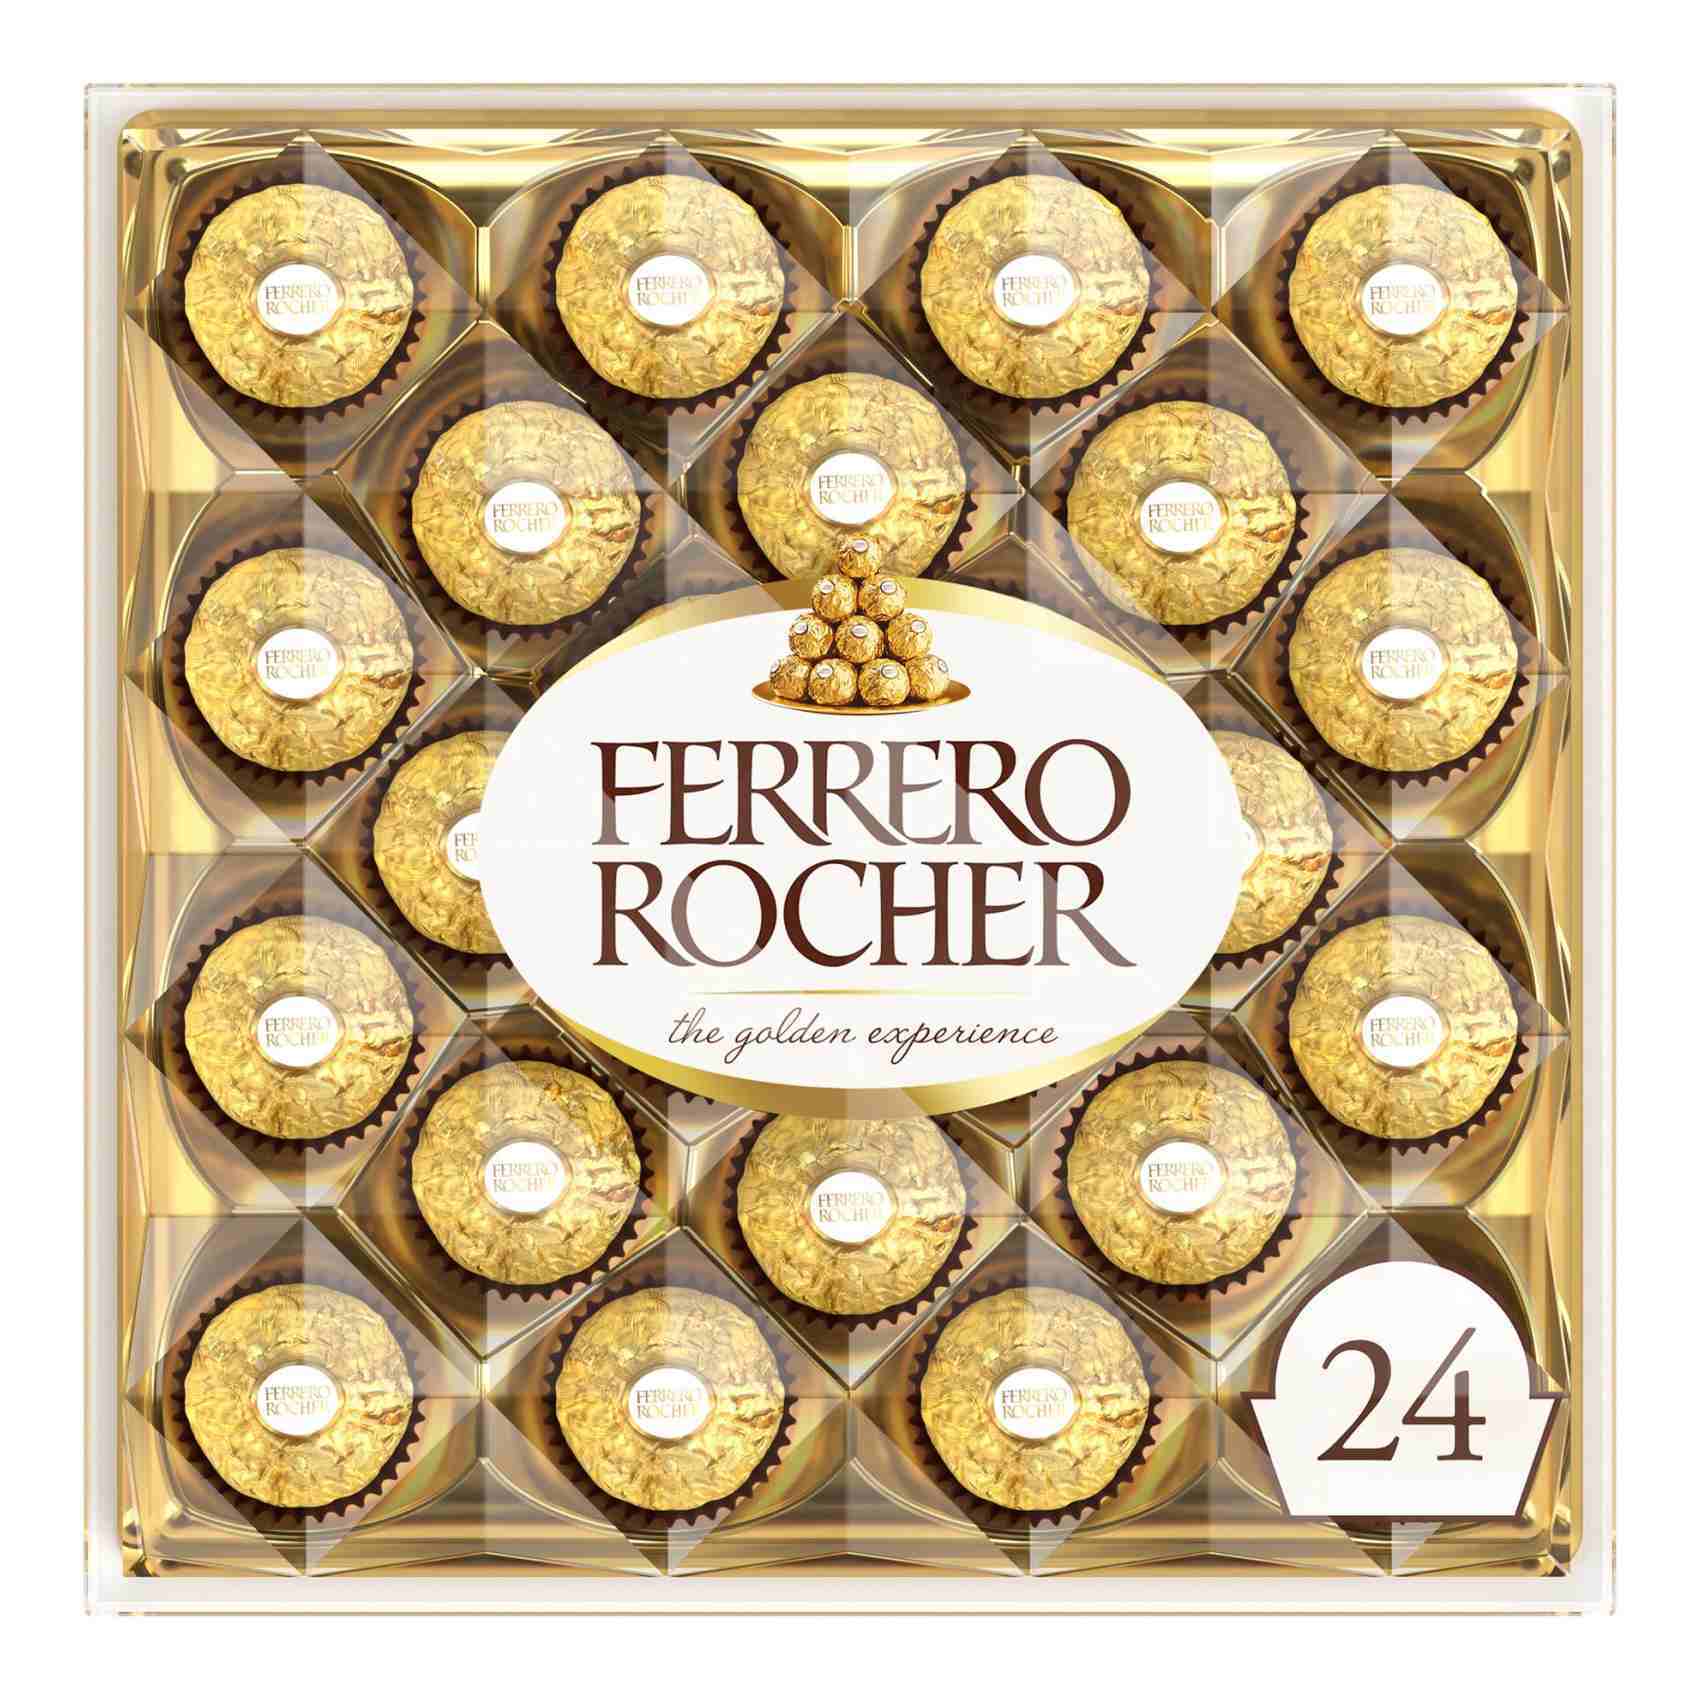 Ferrero Rocher Fine Crunchy Hazelnuts dipped in Smooth Milk Chocolate Individually Wrapped in Elegant Gold Foil Wrapper Piece Gift Box Online - Shop Food on Carrefour UAE